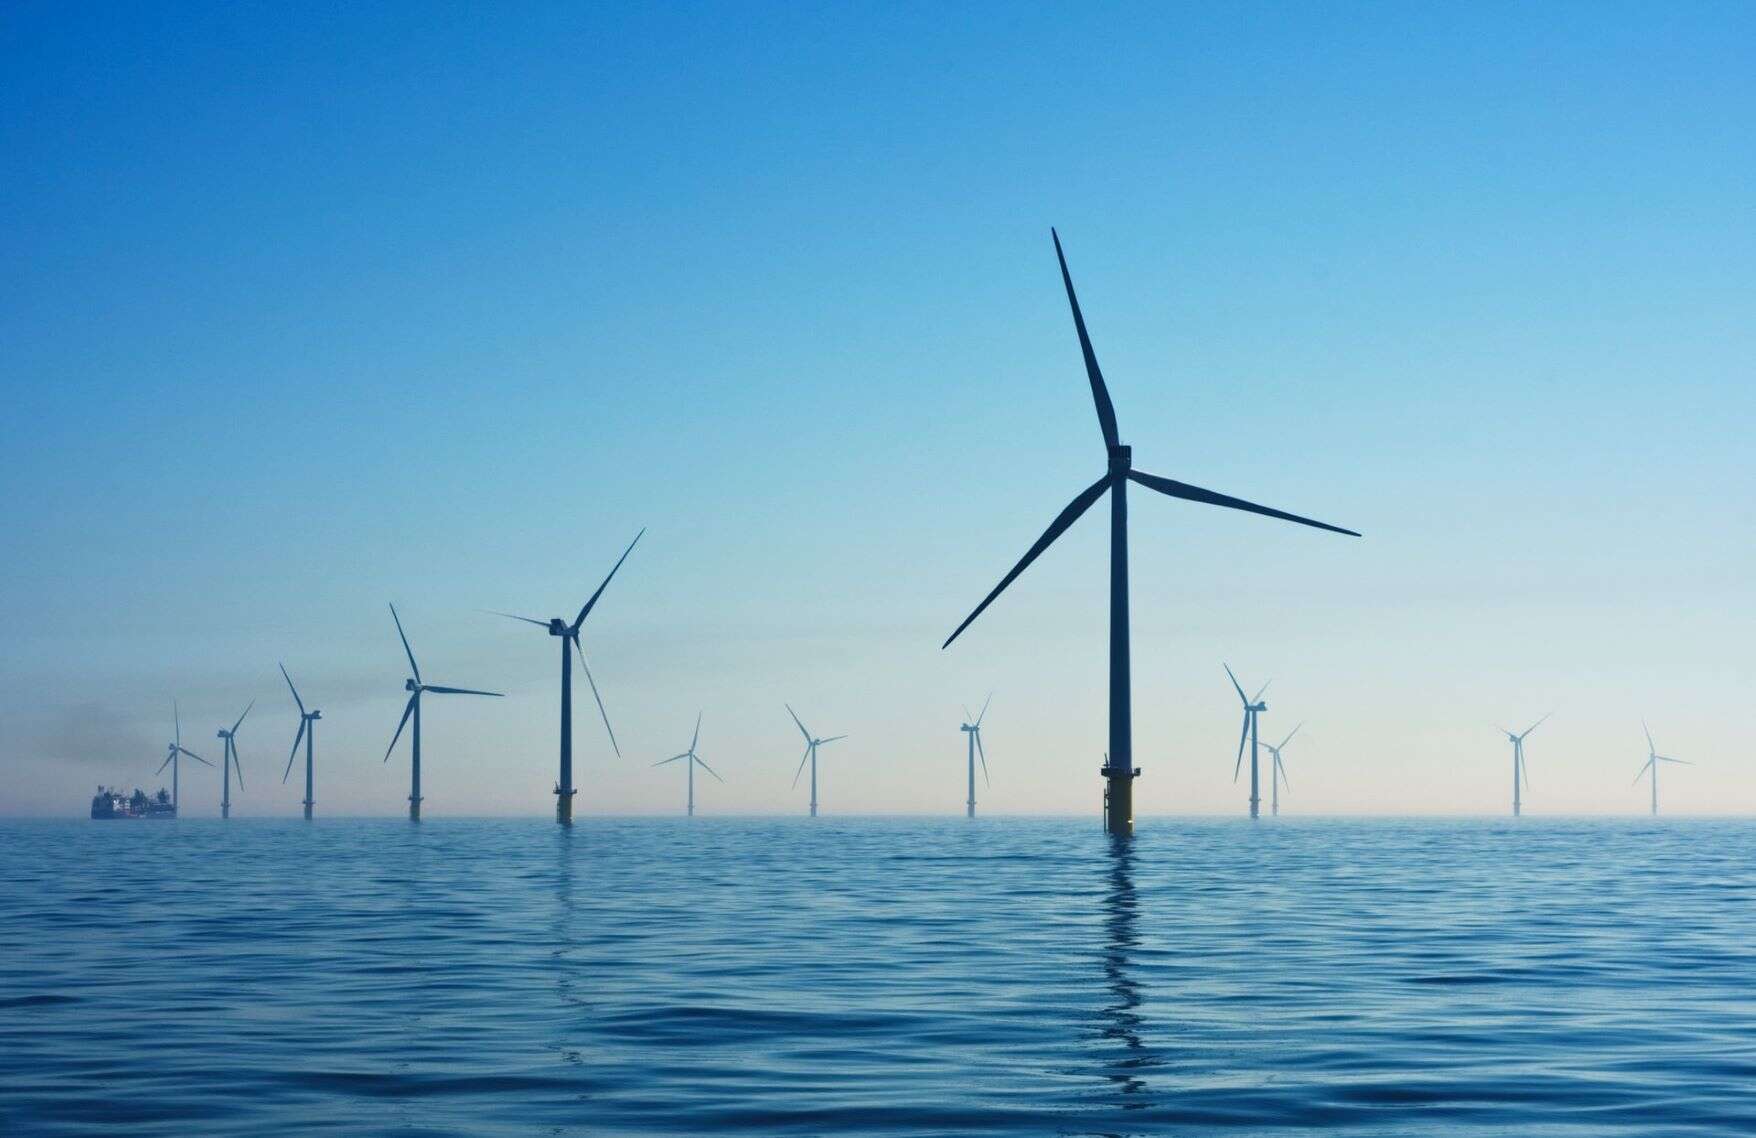 Amazon to Build New 115MW Wind Farm in Ireland, as Company Aims for 100% Renewables by 2025